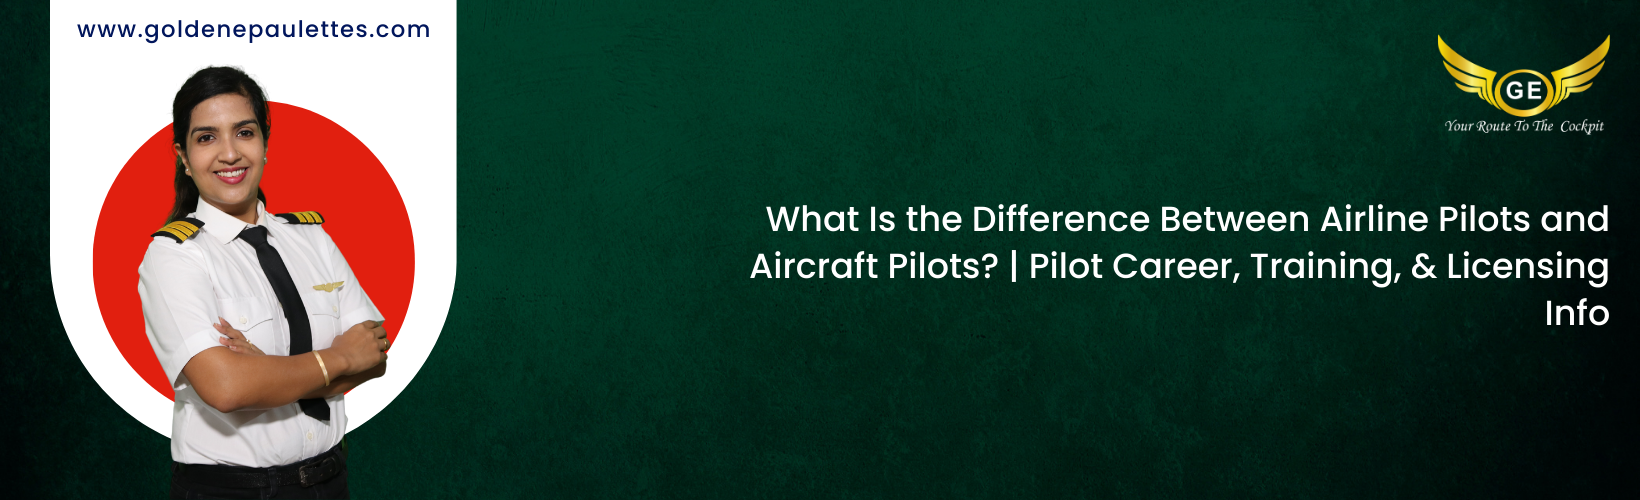 What is the Difference Between an Airline Pilot and an Aircraft Pilot